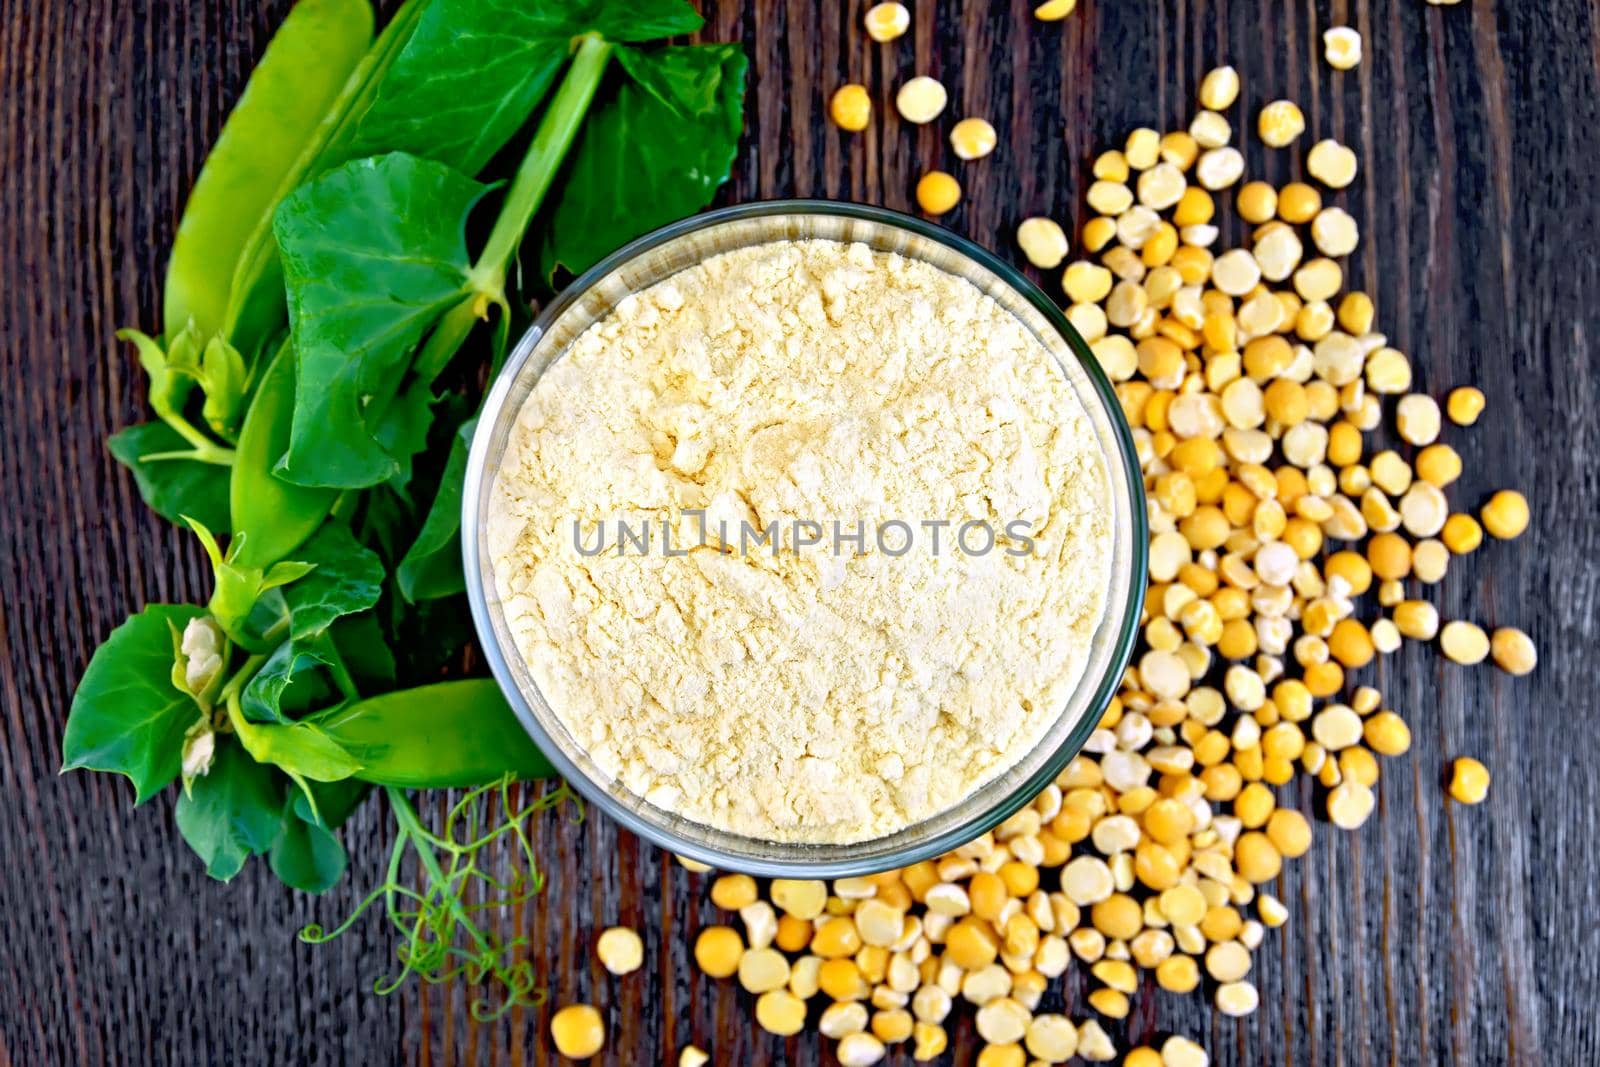 Flour pea in a glassful, fresh pods and split pease on a wooden boards background on top